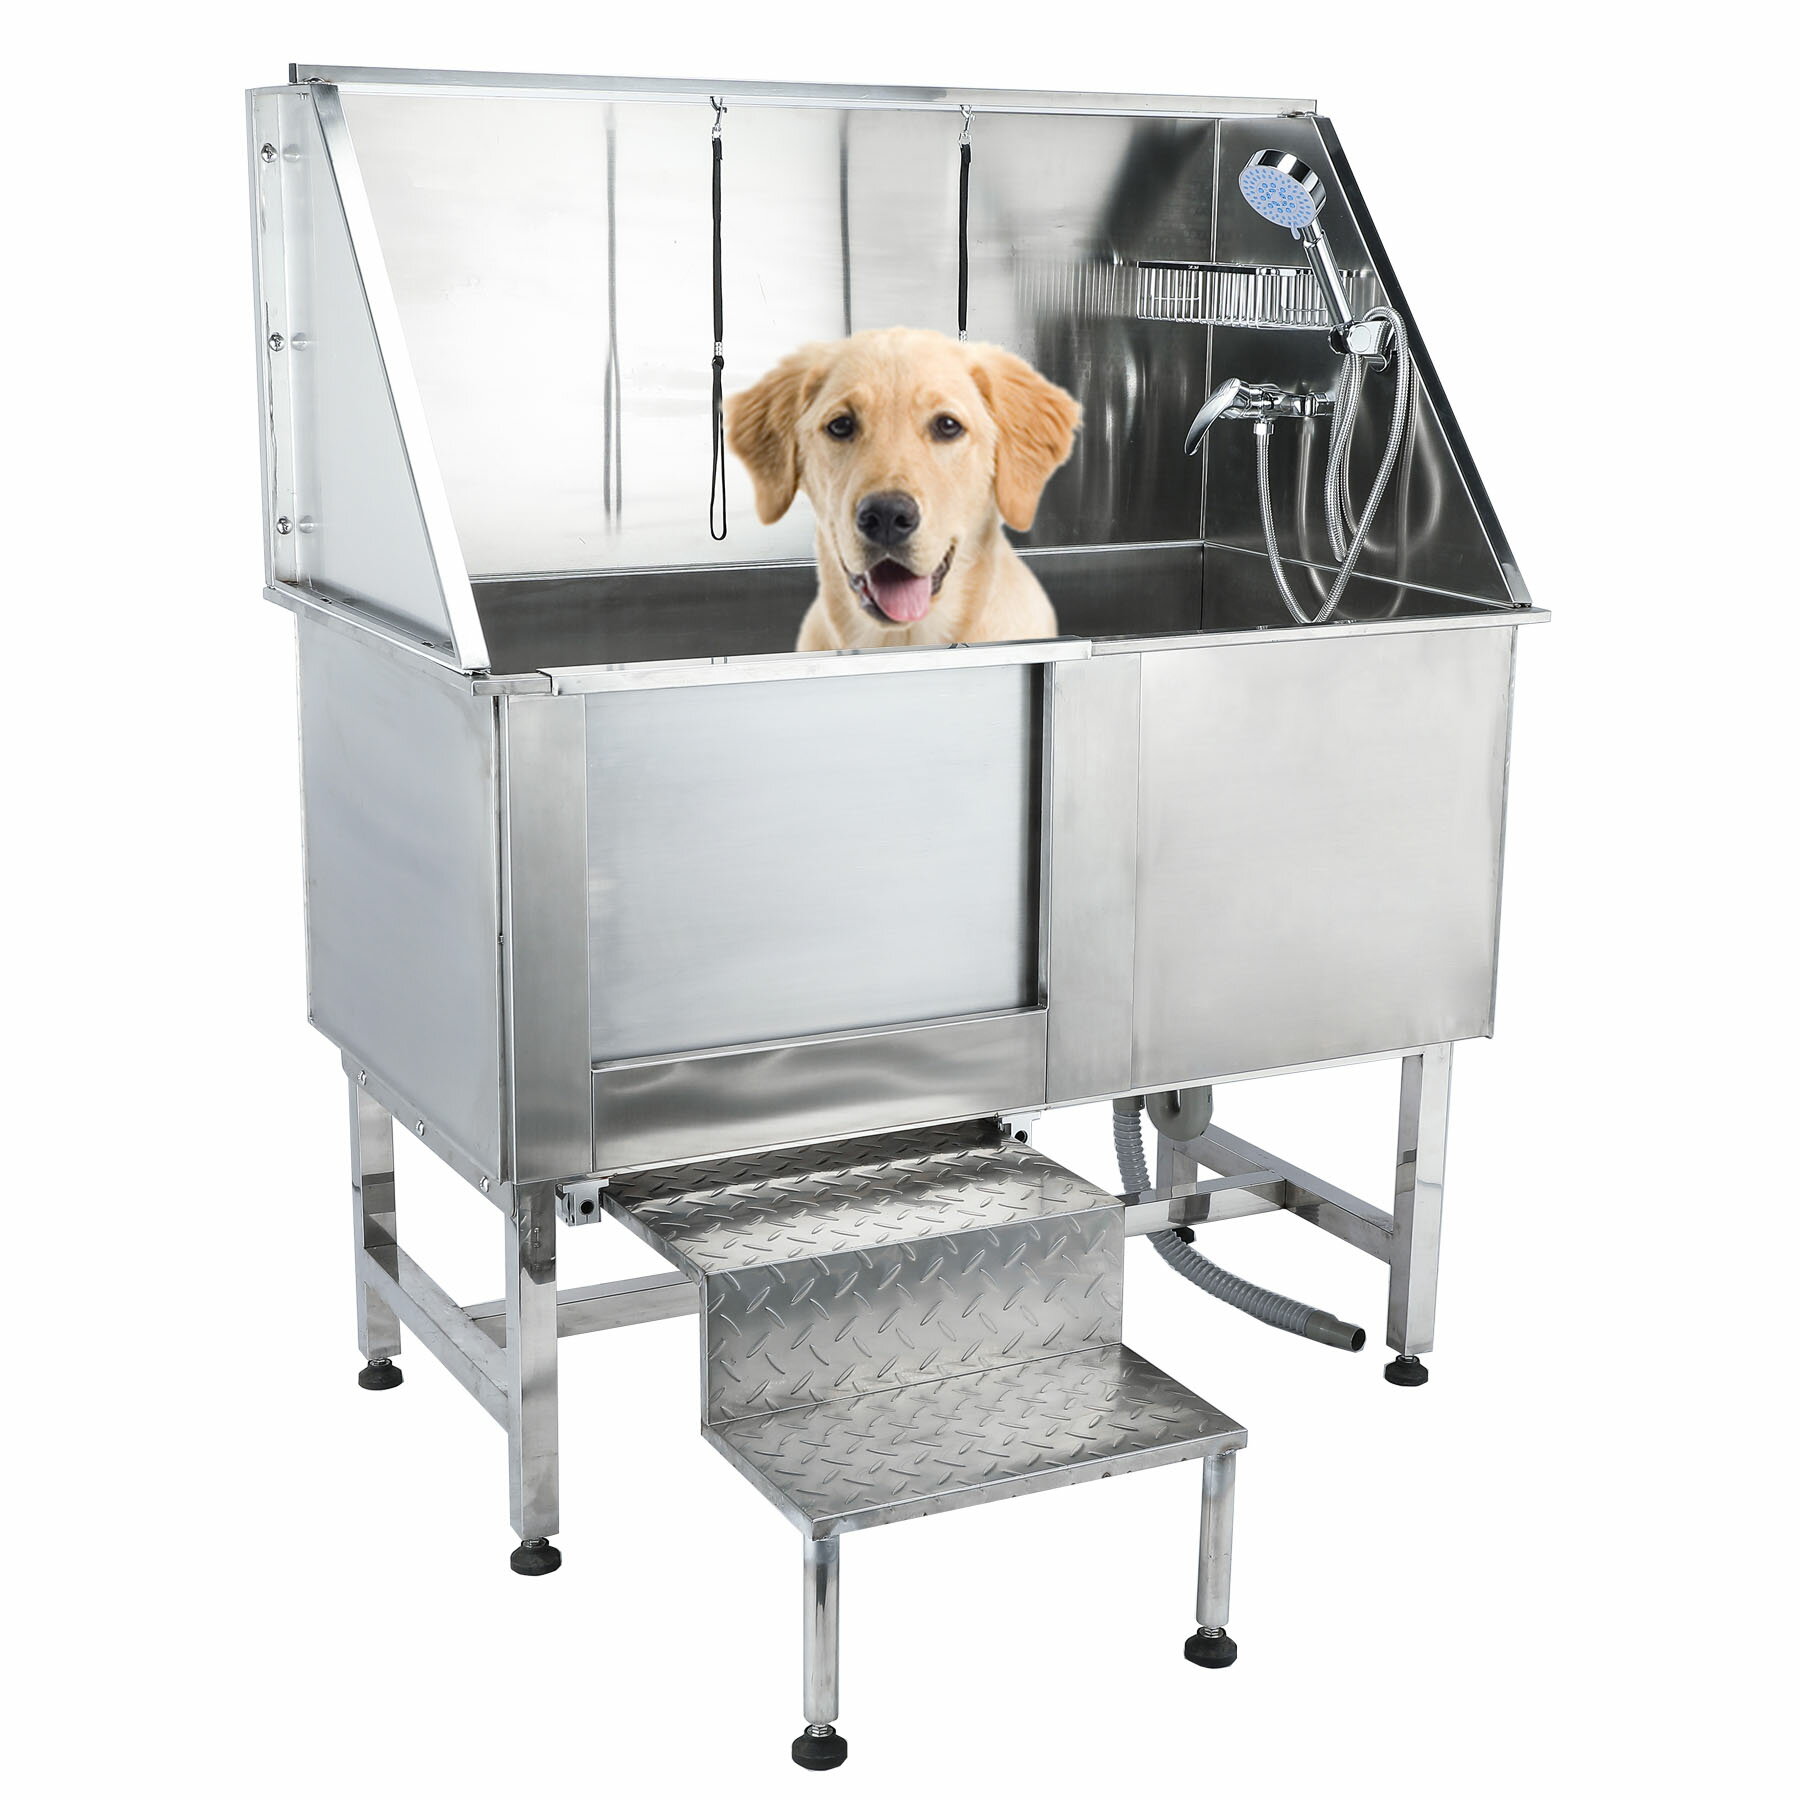 Banyan Imports 50 Professional Stainless Steel Pet Dog Grooming Bath Tub Station Shower Sink W Faucet Walk In Ramp Accessories Rakuten Com